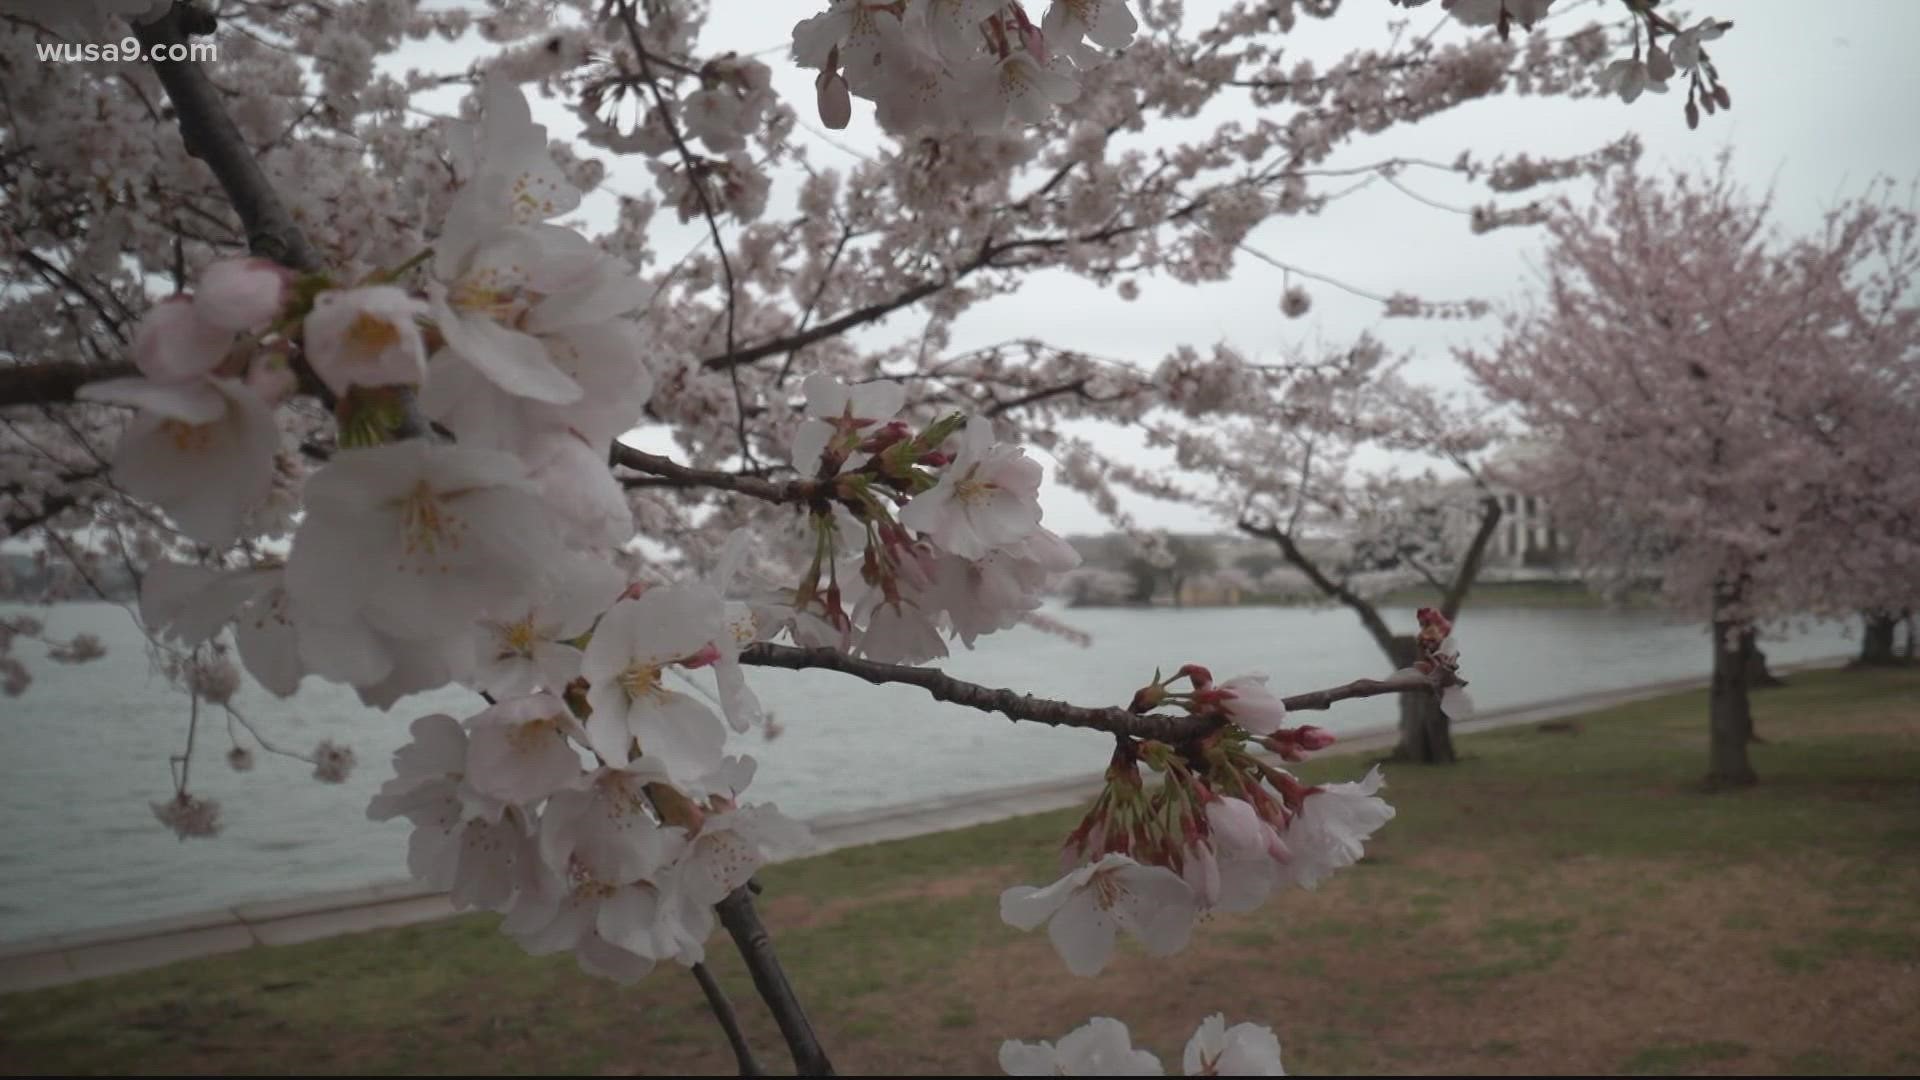 For over a century, more than a million people have flocked to the Tidal Basin every year to see the cherry blossoms, but climate change is threatening the blooms.